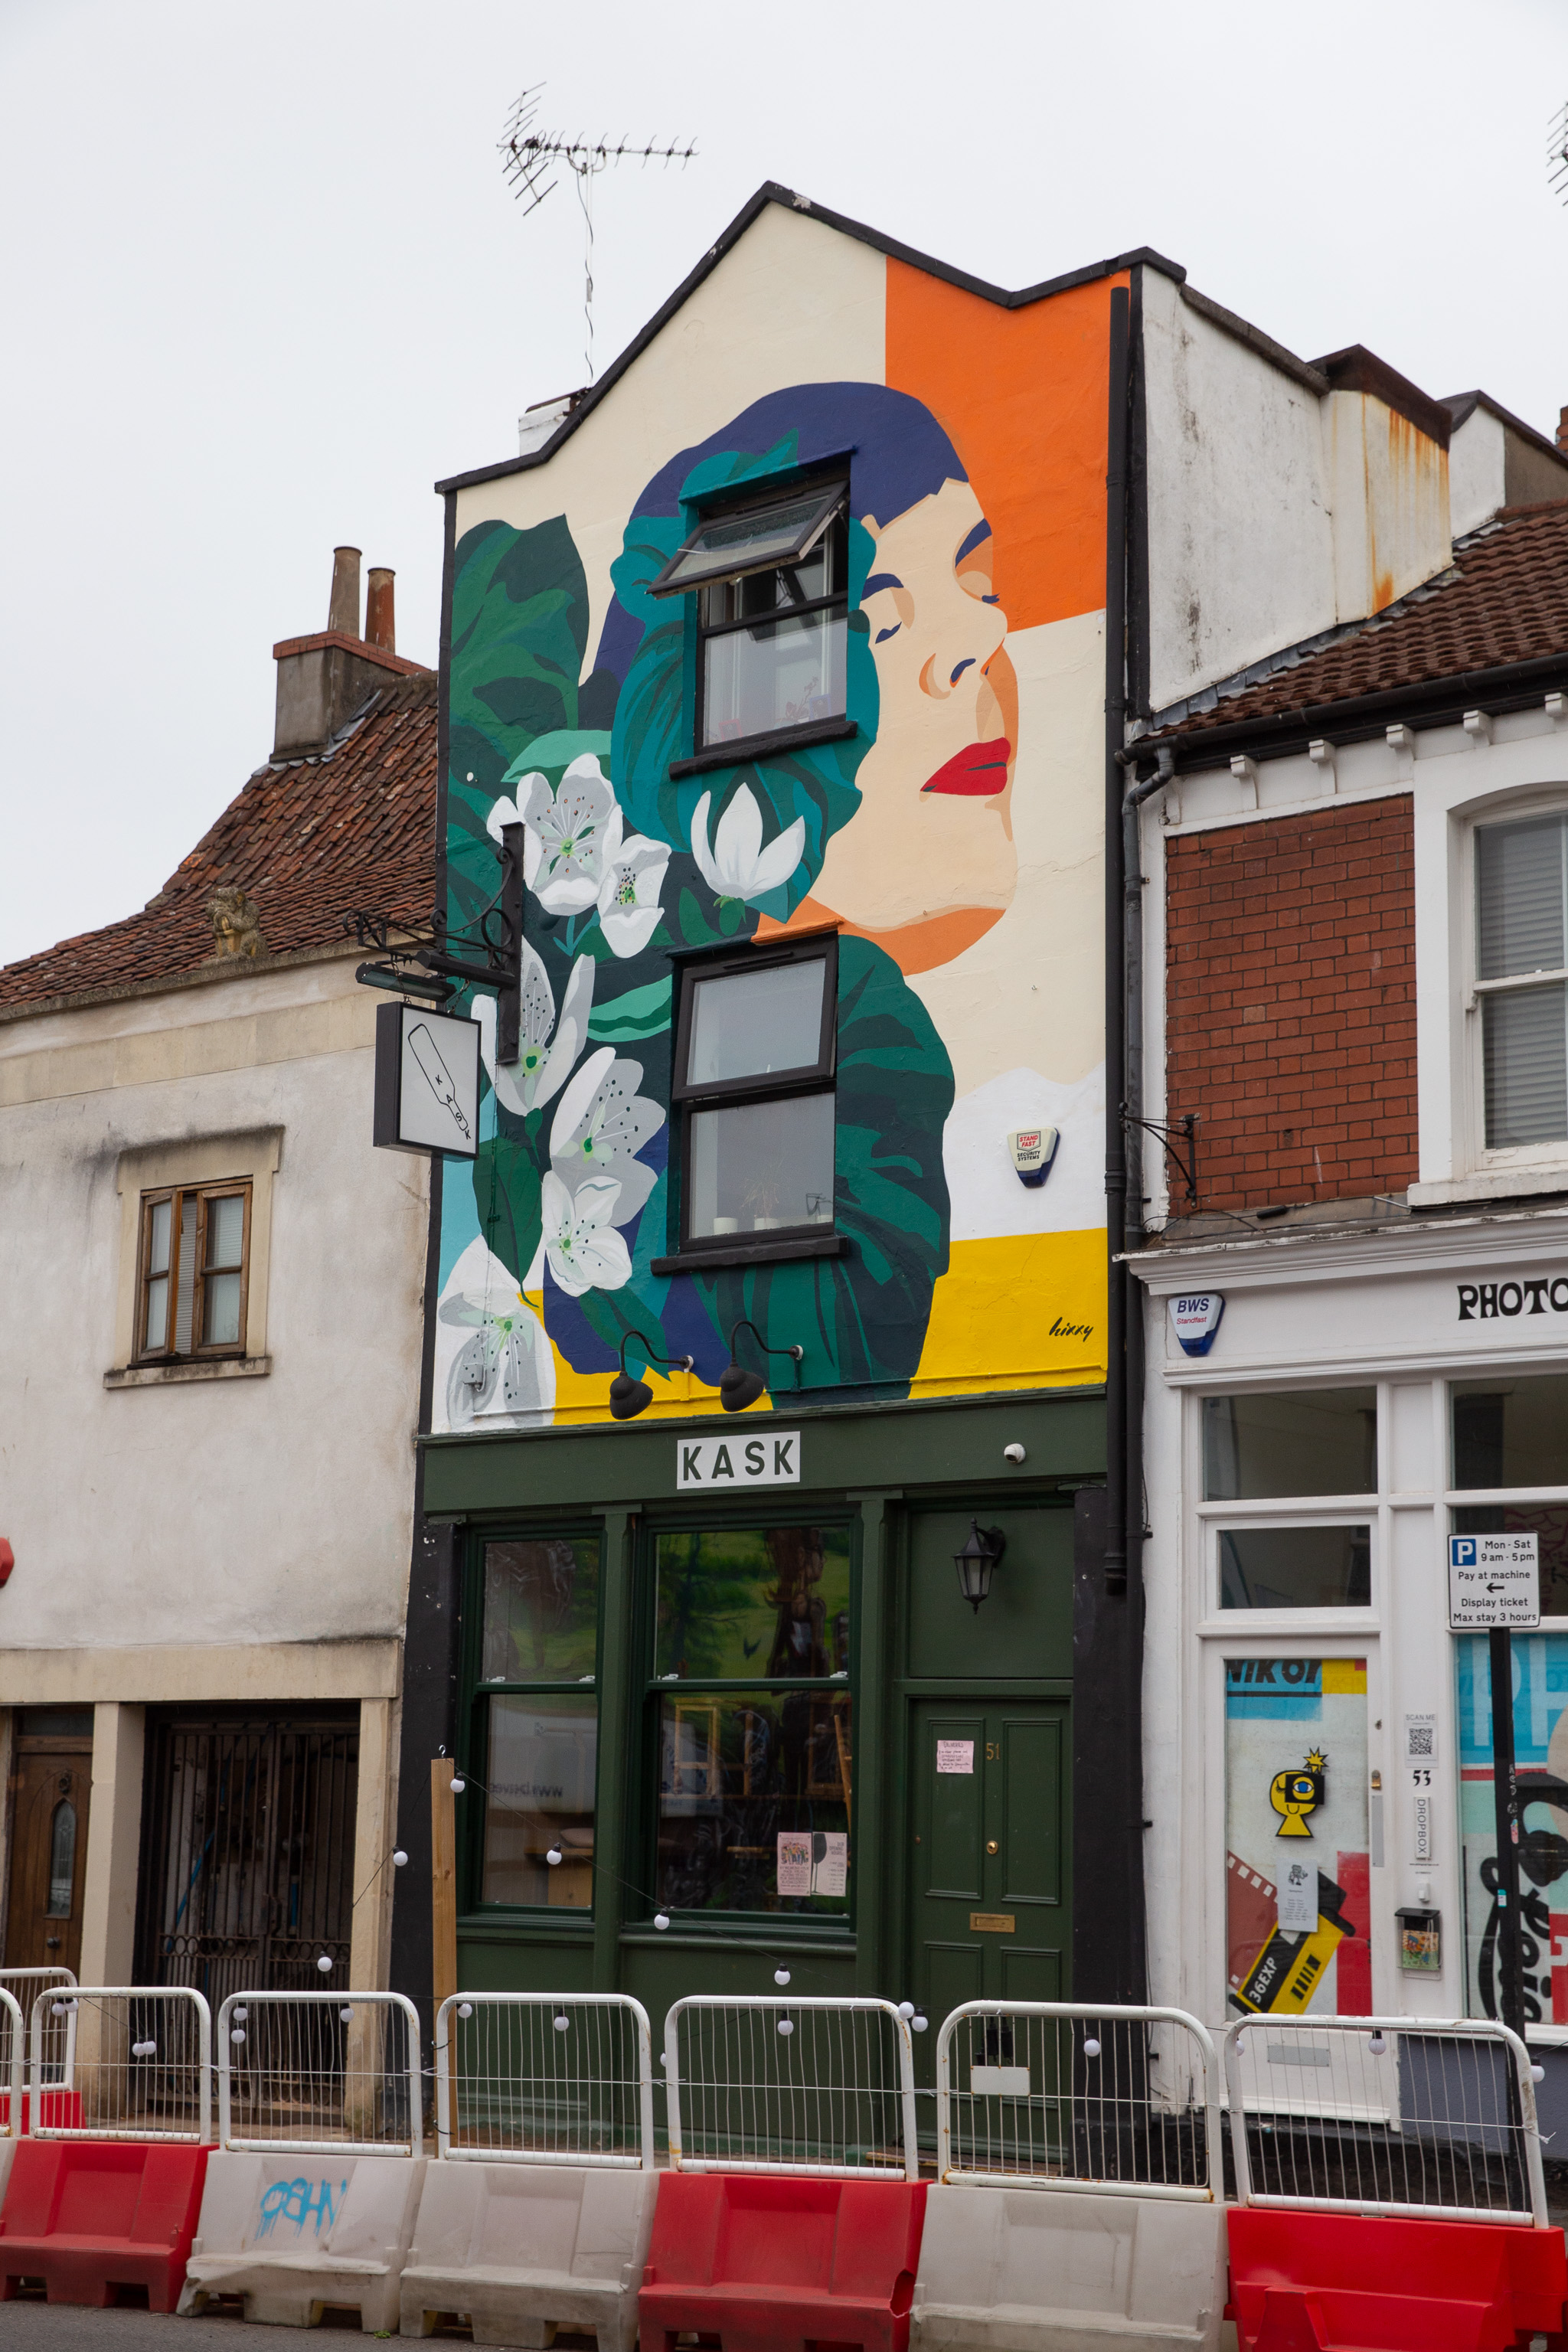 KASK
Mural by Hixxy, Josephine Hicks.
